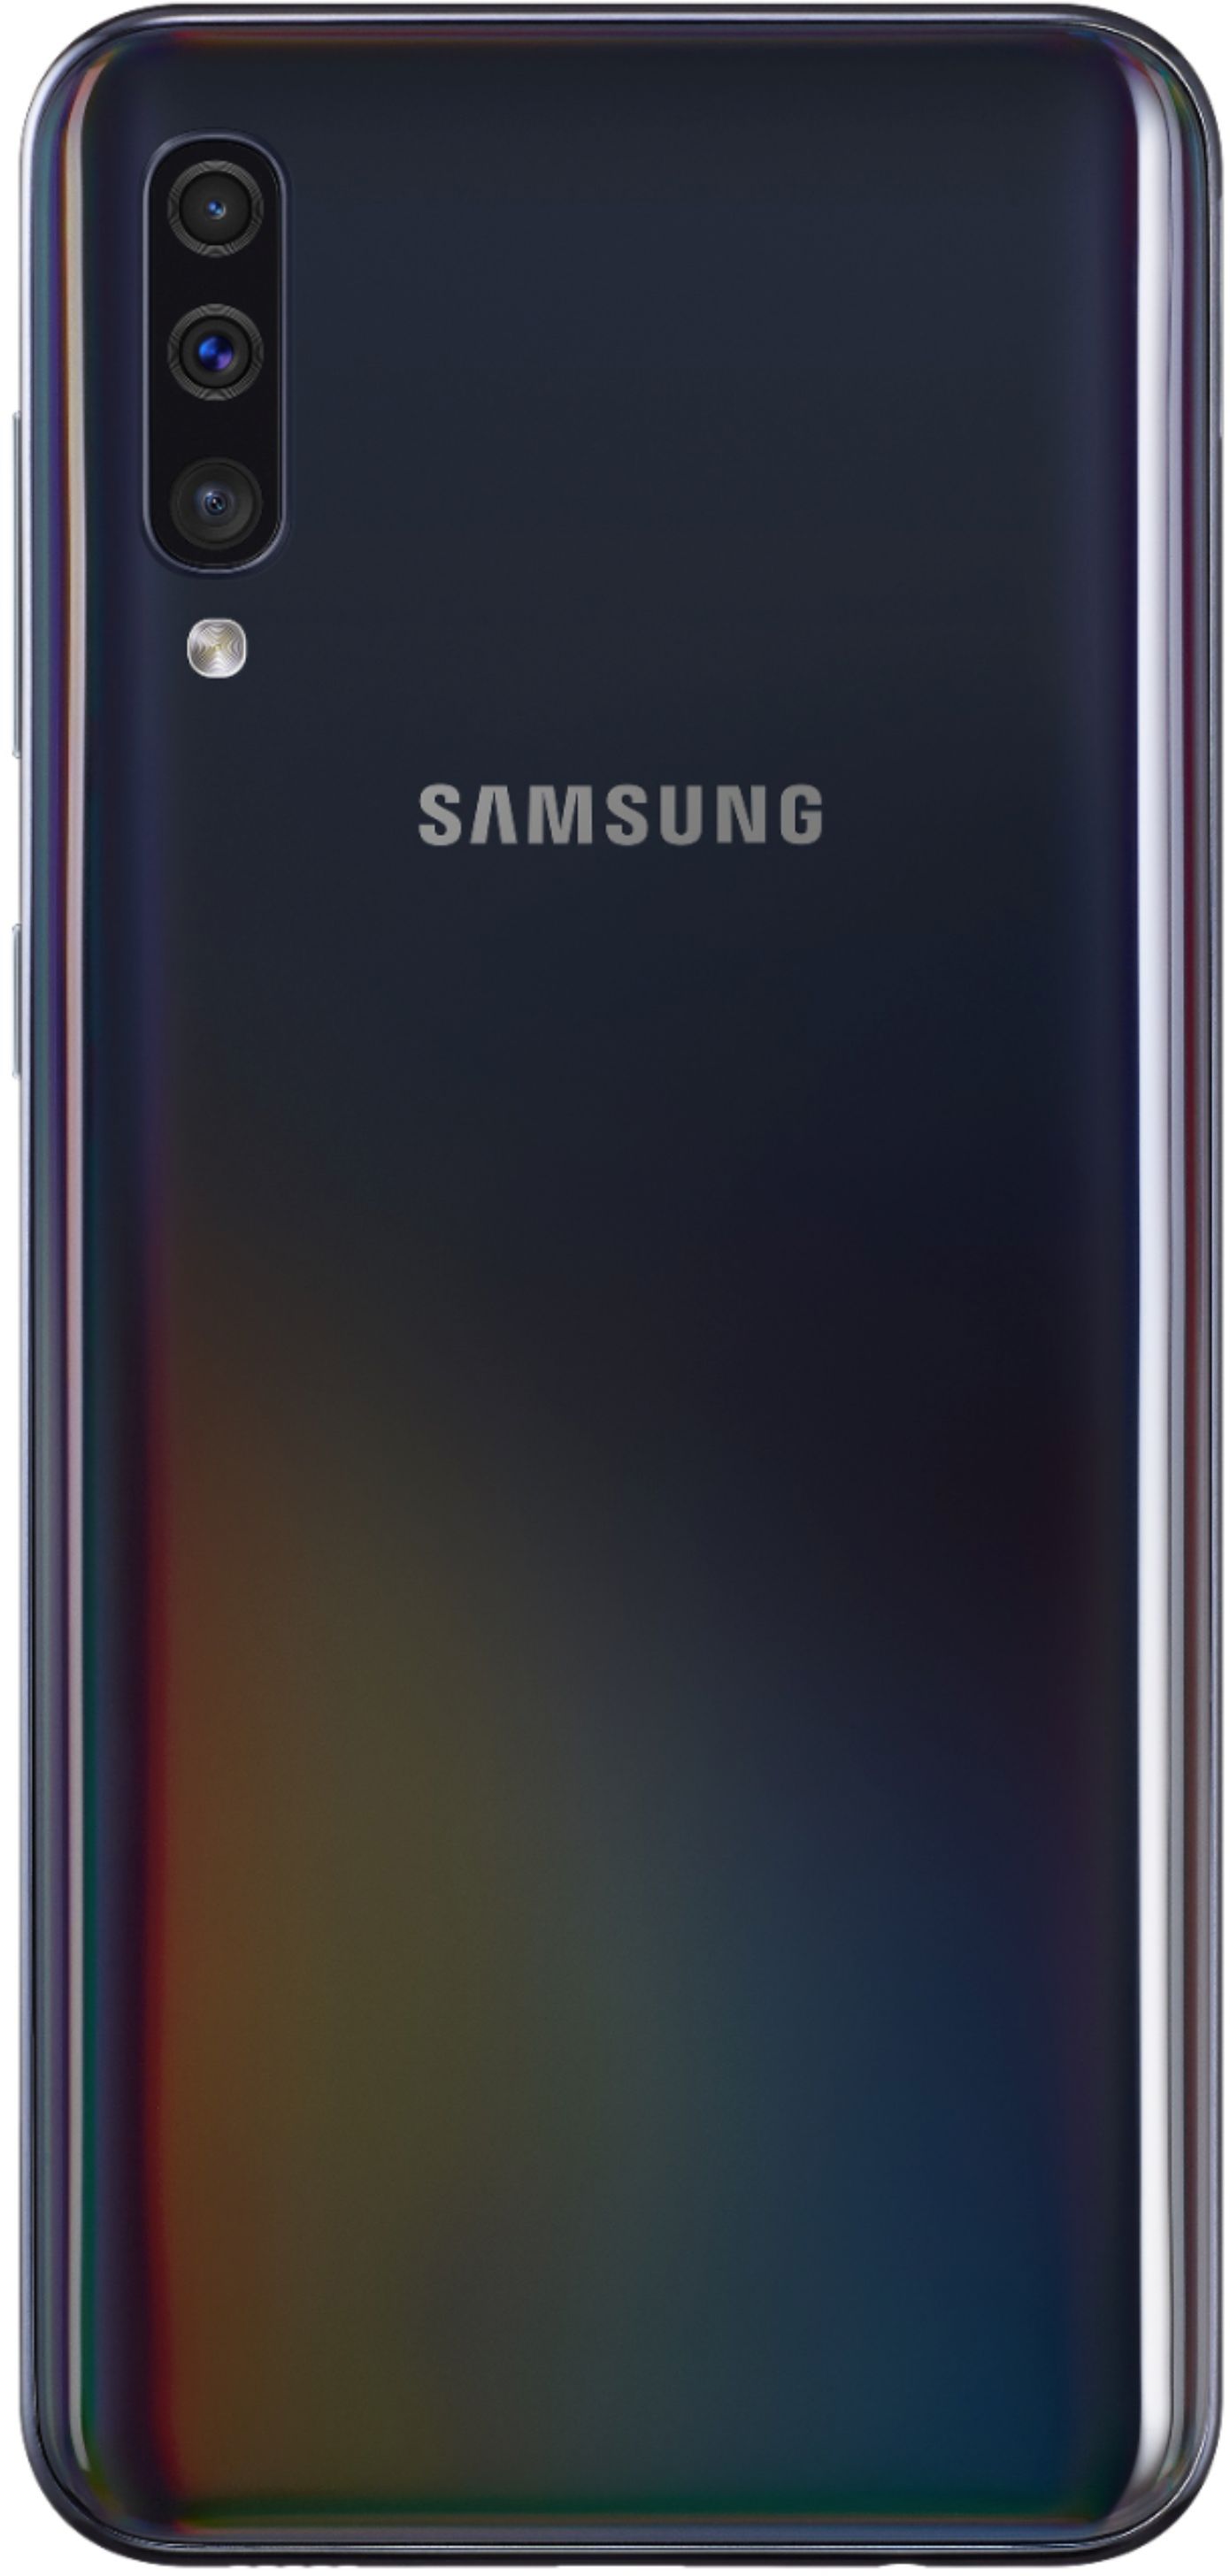 Back View: Samsung Care+ for Range - 3 Year Plan